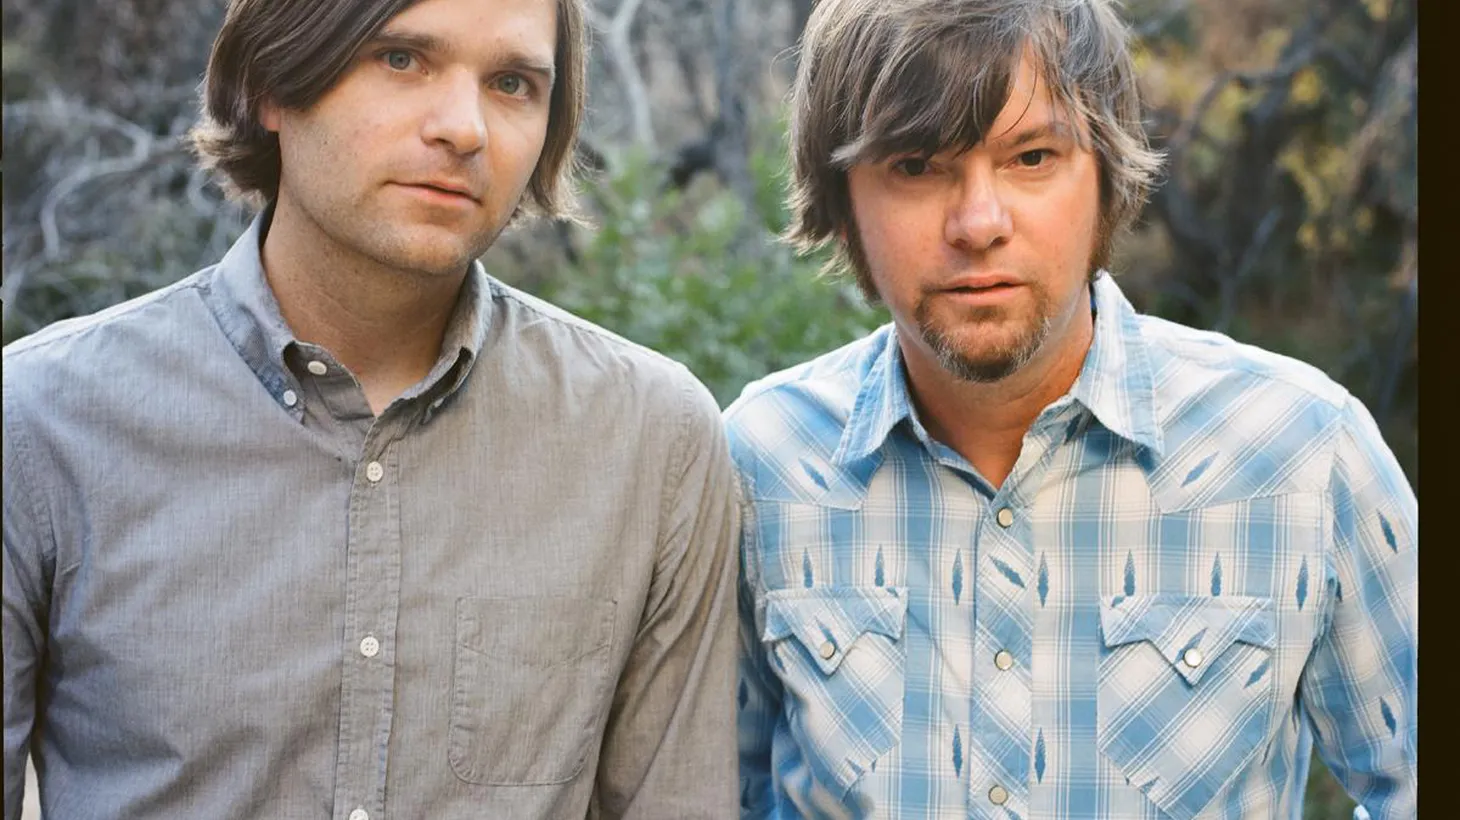 Jay Farrar of Son Volt and Ben Gibbard of Death Cab for Cutie seem like an unlikely pairing, but their shared appreciation for Beat writer Jack Keroauc lead them to write songs with lyrics taken from the 1962 novel, Big Sur. They’ll share their music live on Morning Becomes Eclectic at 11:15am.